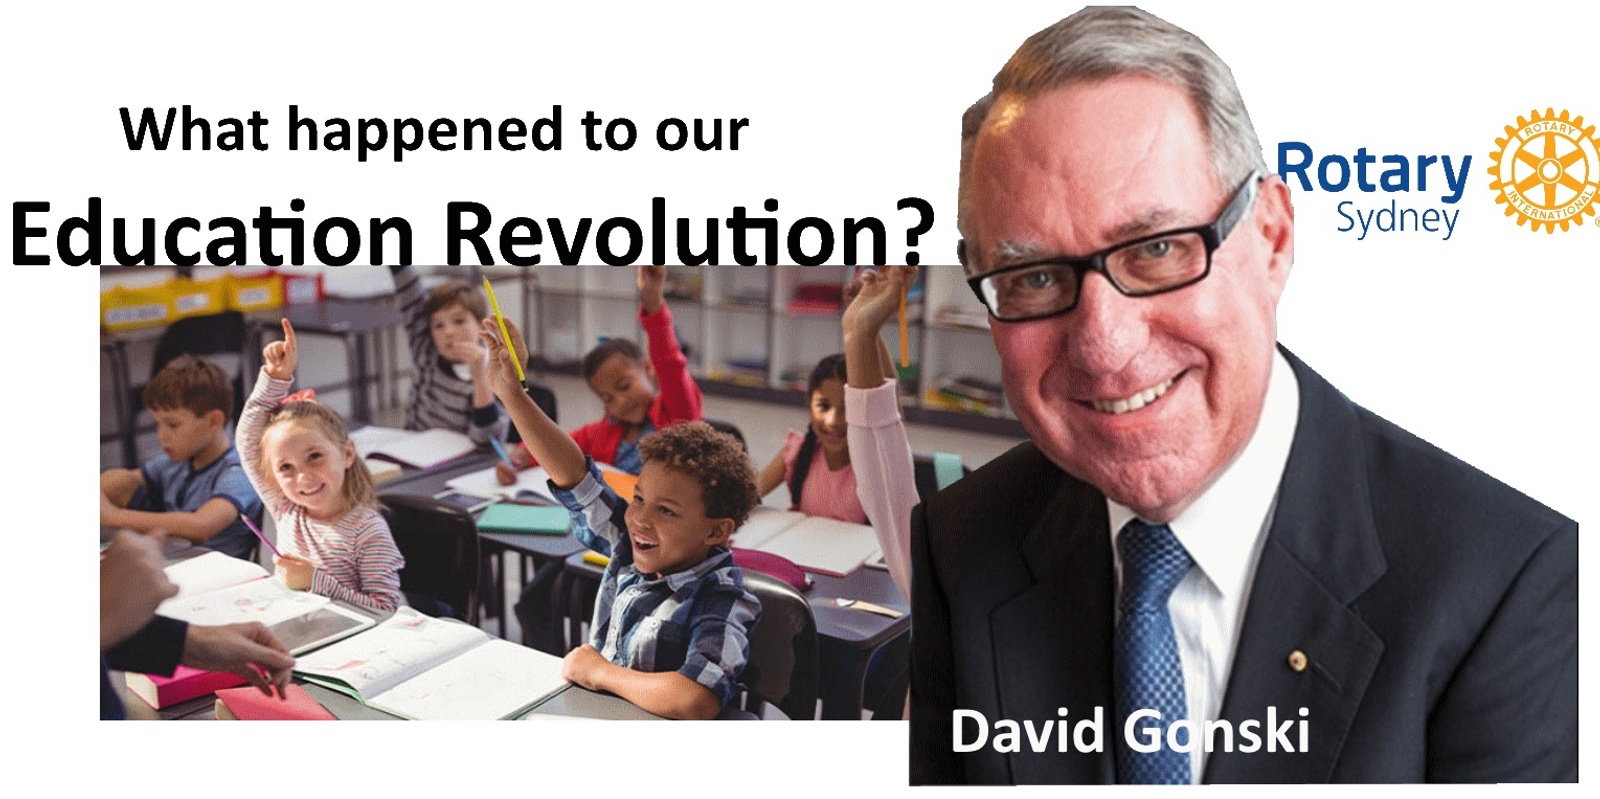 Banner image for Rotary Club of Sydney - Whatever happened to our education revolution?